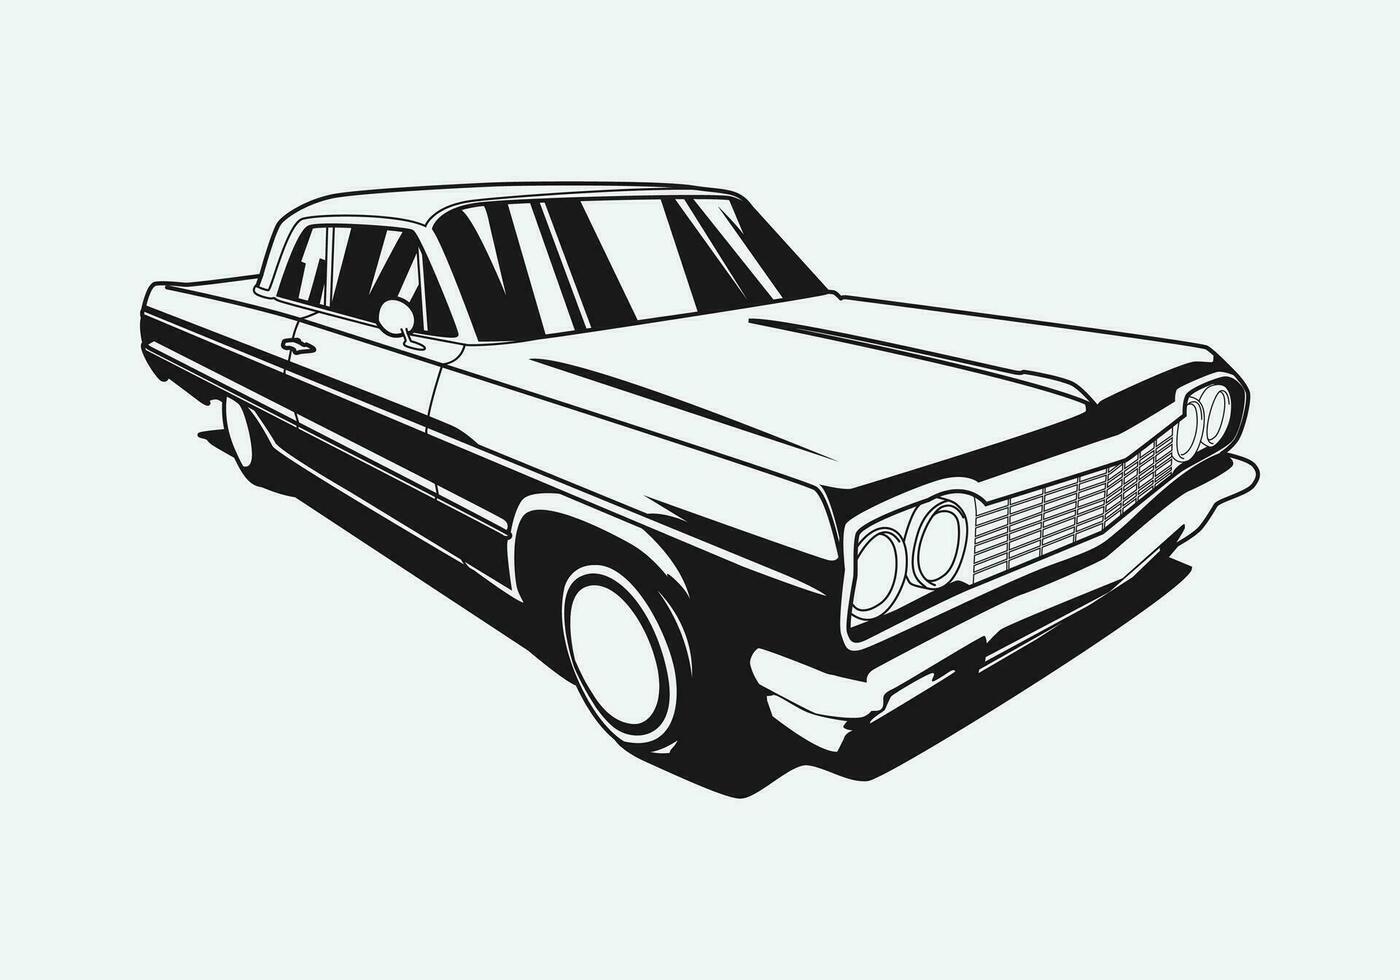 silhouette of lowrider car. vintage car. graphic vector illustration.